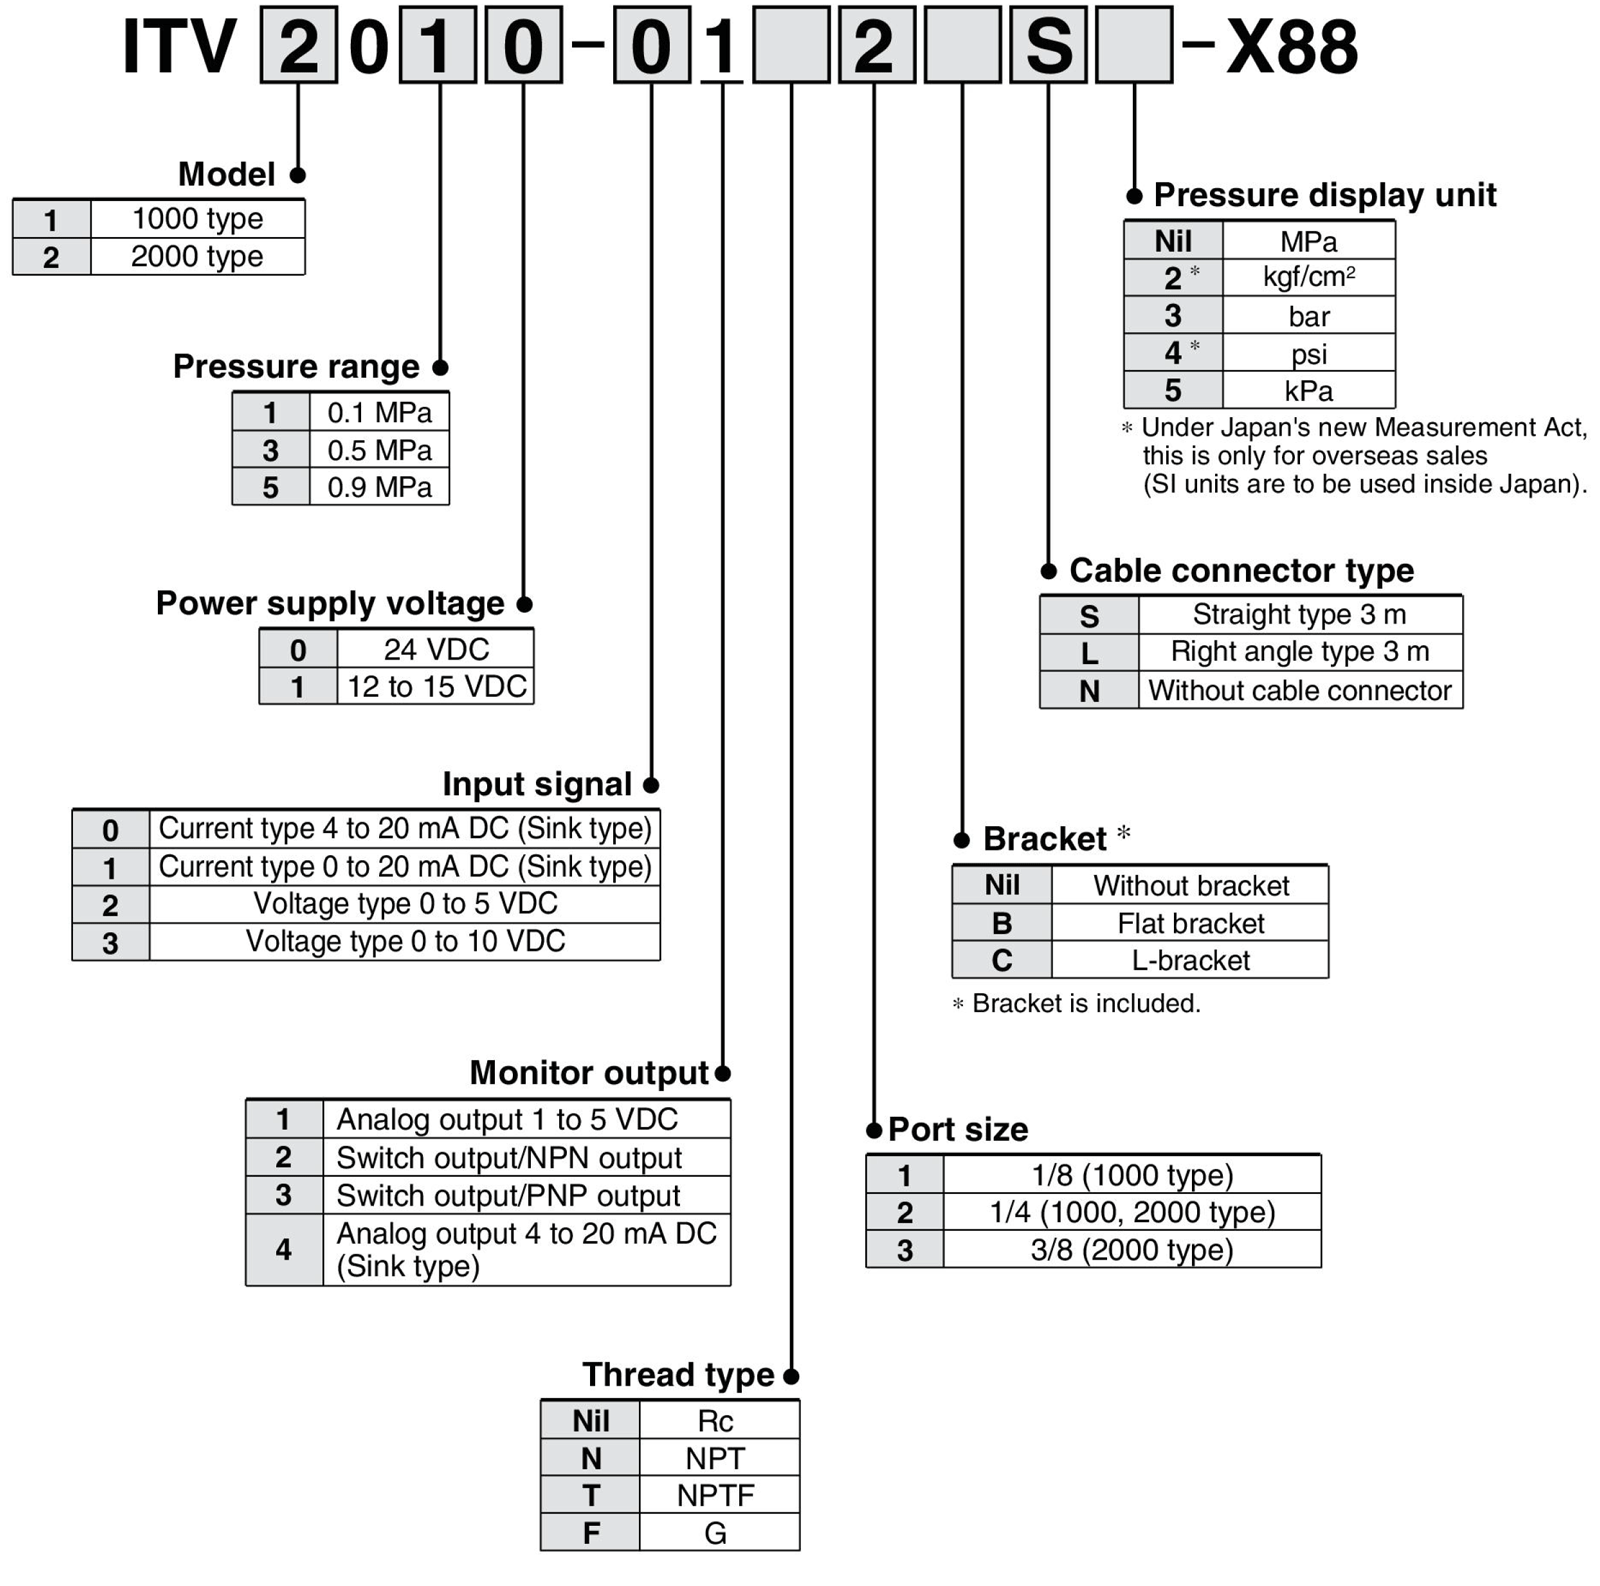 Made-to-order specifications X88: model number example